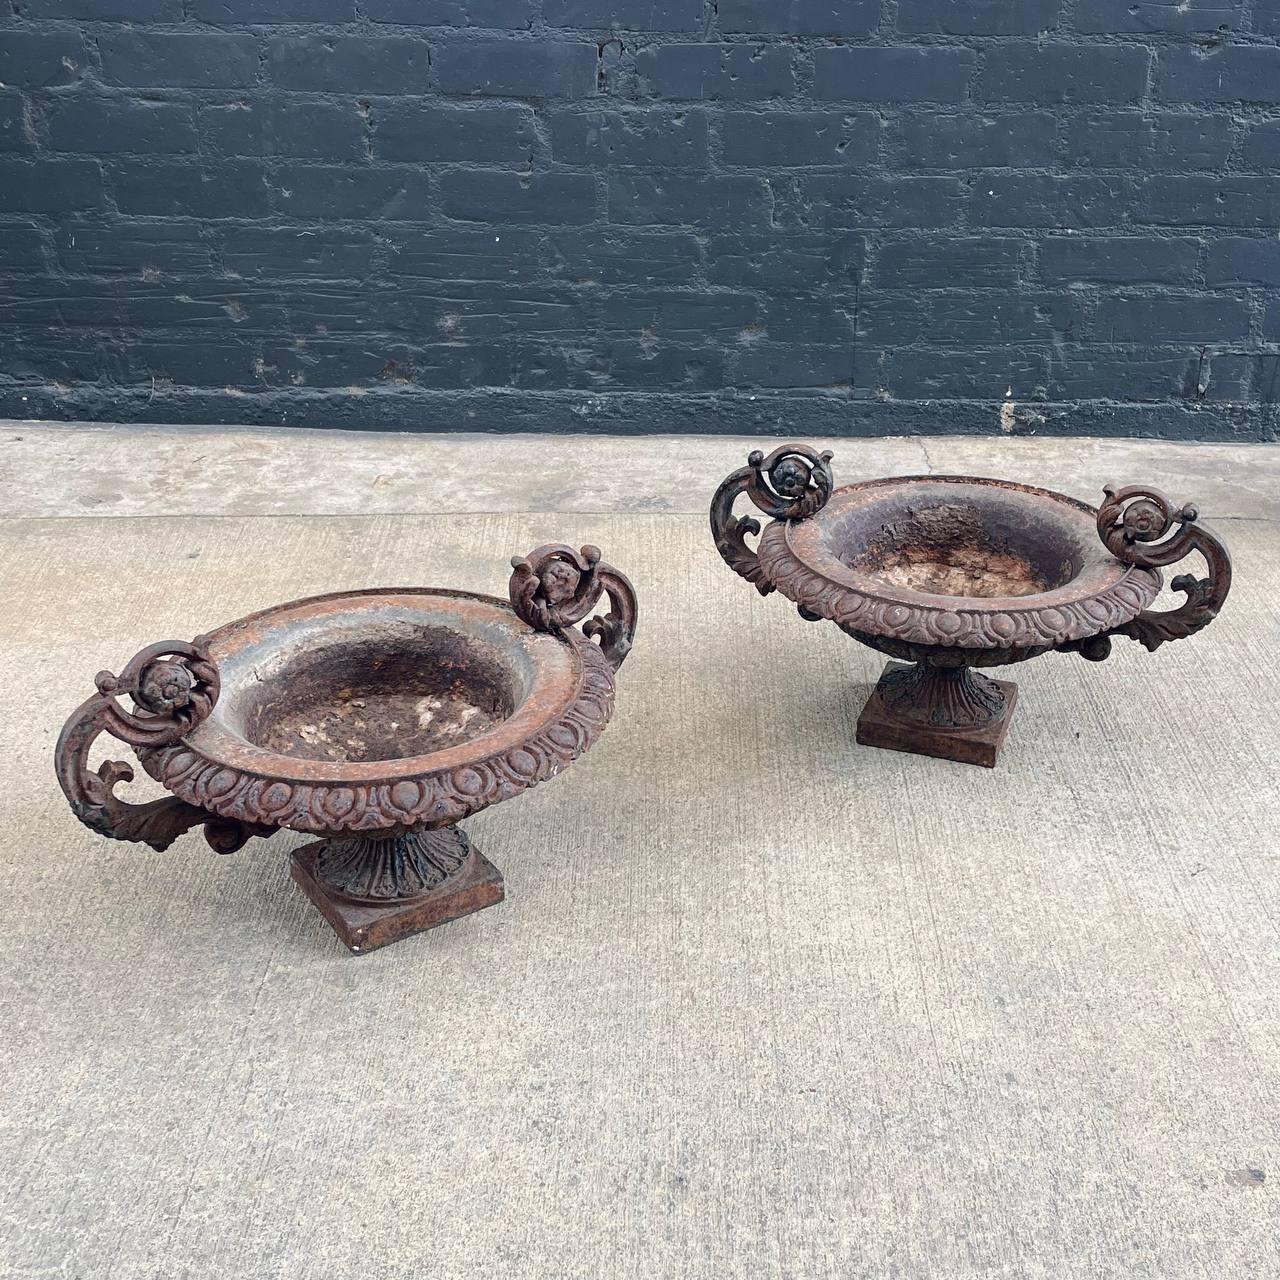 Pair of French Neoclassical Cast Iron Garden Urns

Country: France
Materials: Cast Iron 
Condition: Original Vintage Condition
Style: French Neoclassical
Year: 1920s

$2,895 pair 

Dimensions:
13.50”H x 23.50”W x 18”D